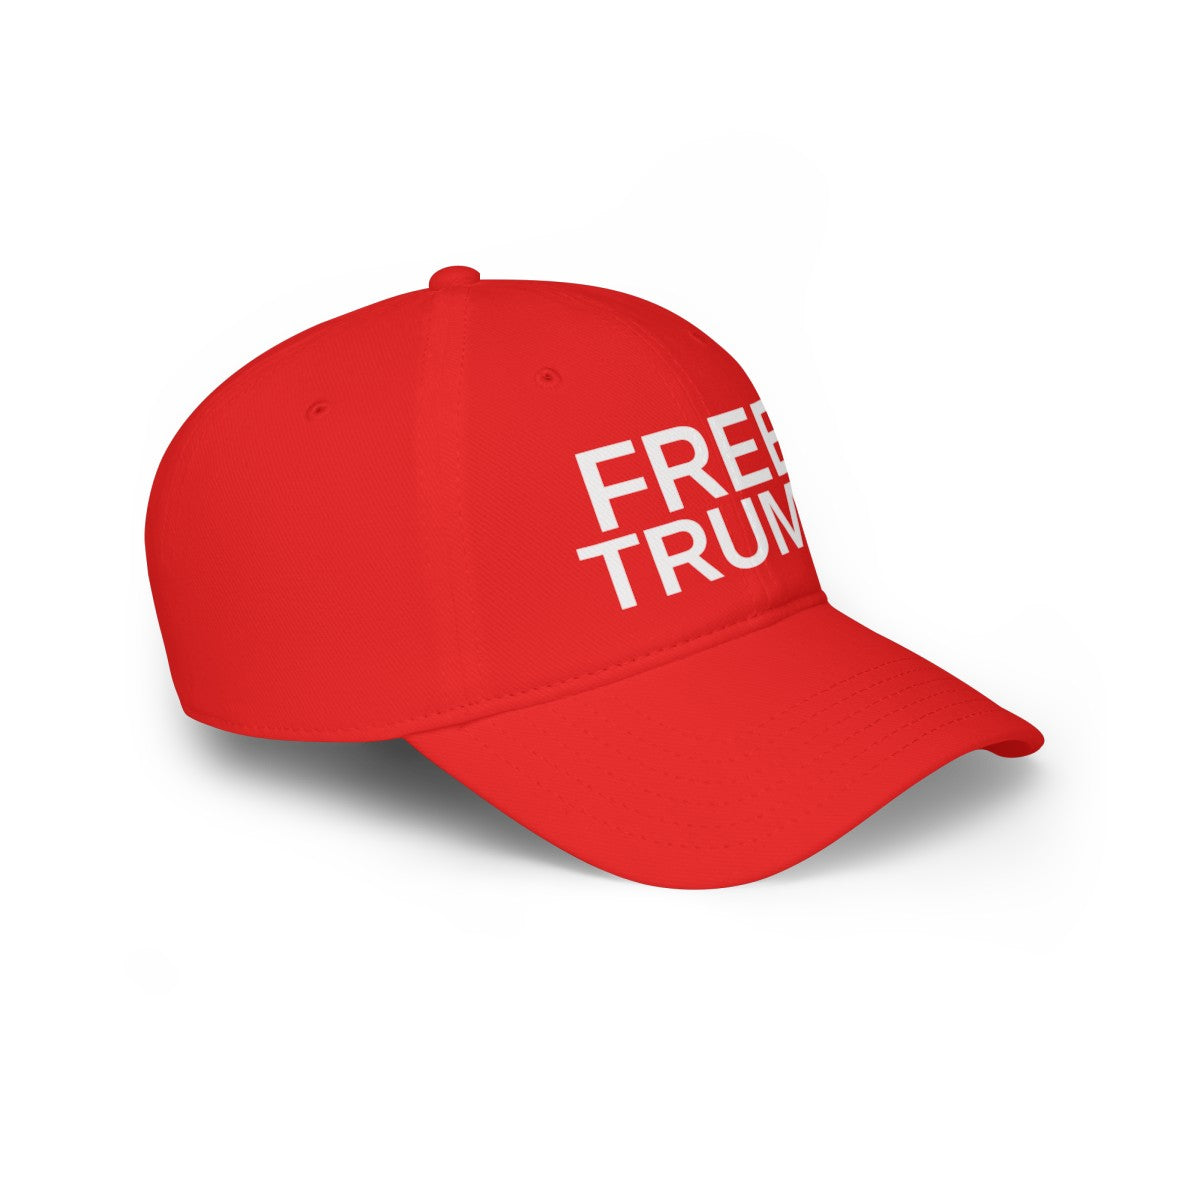 Get trendy with Free Trump Baseball Cap -  available at Good Gift Company. Grab yours for $21.98 today!